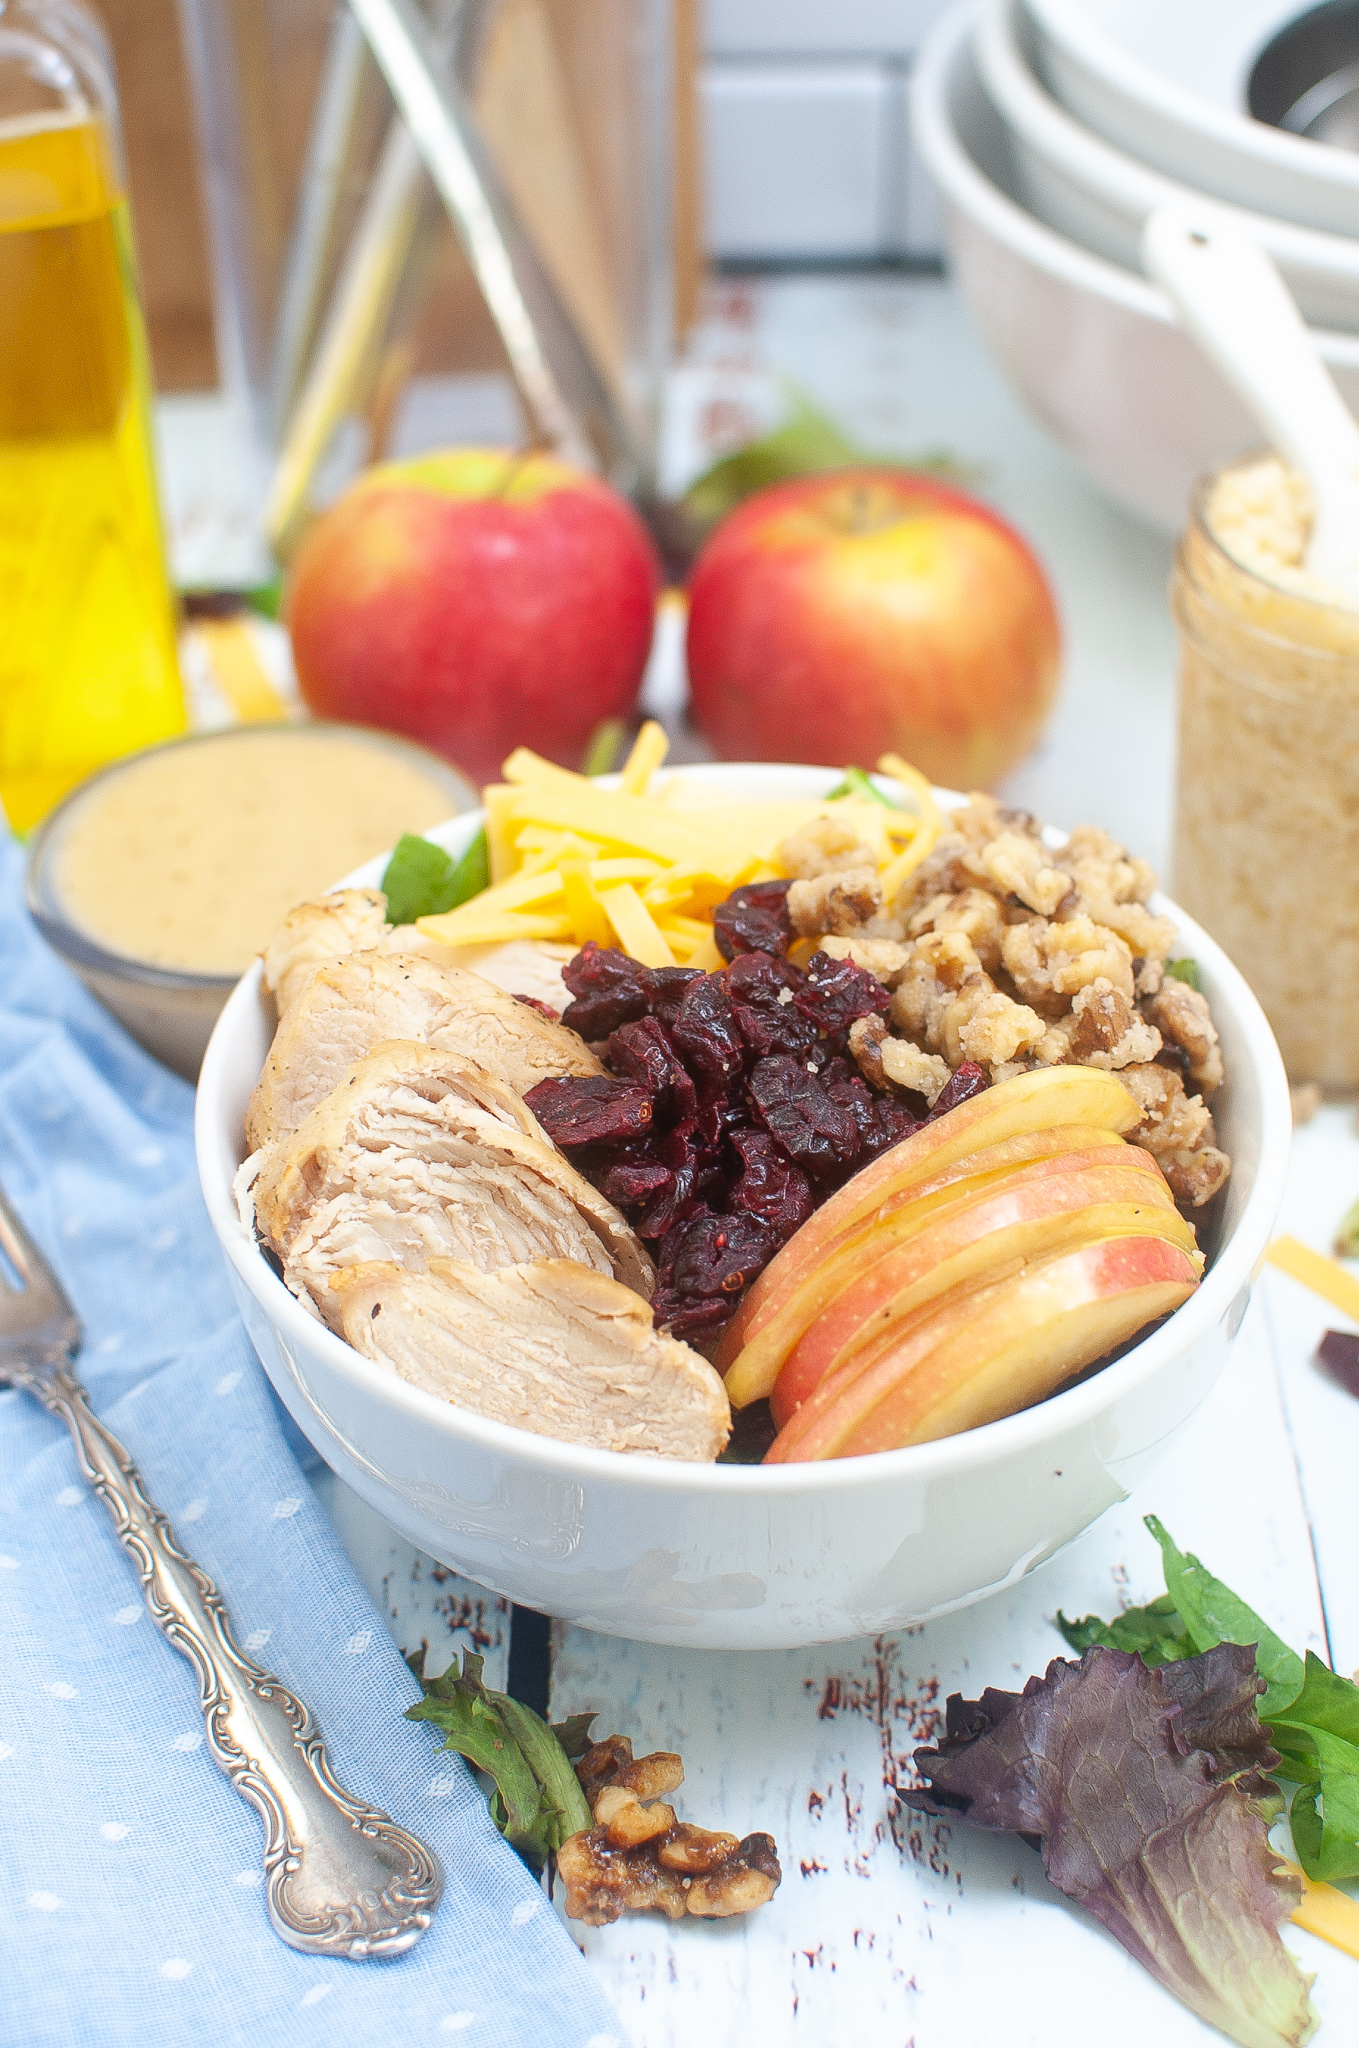 Salad topped with Chicken, cheese, walnuts, cranberries, and apples.